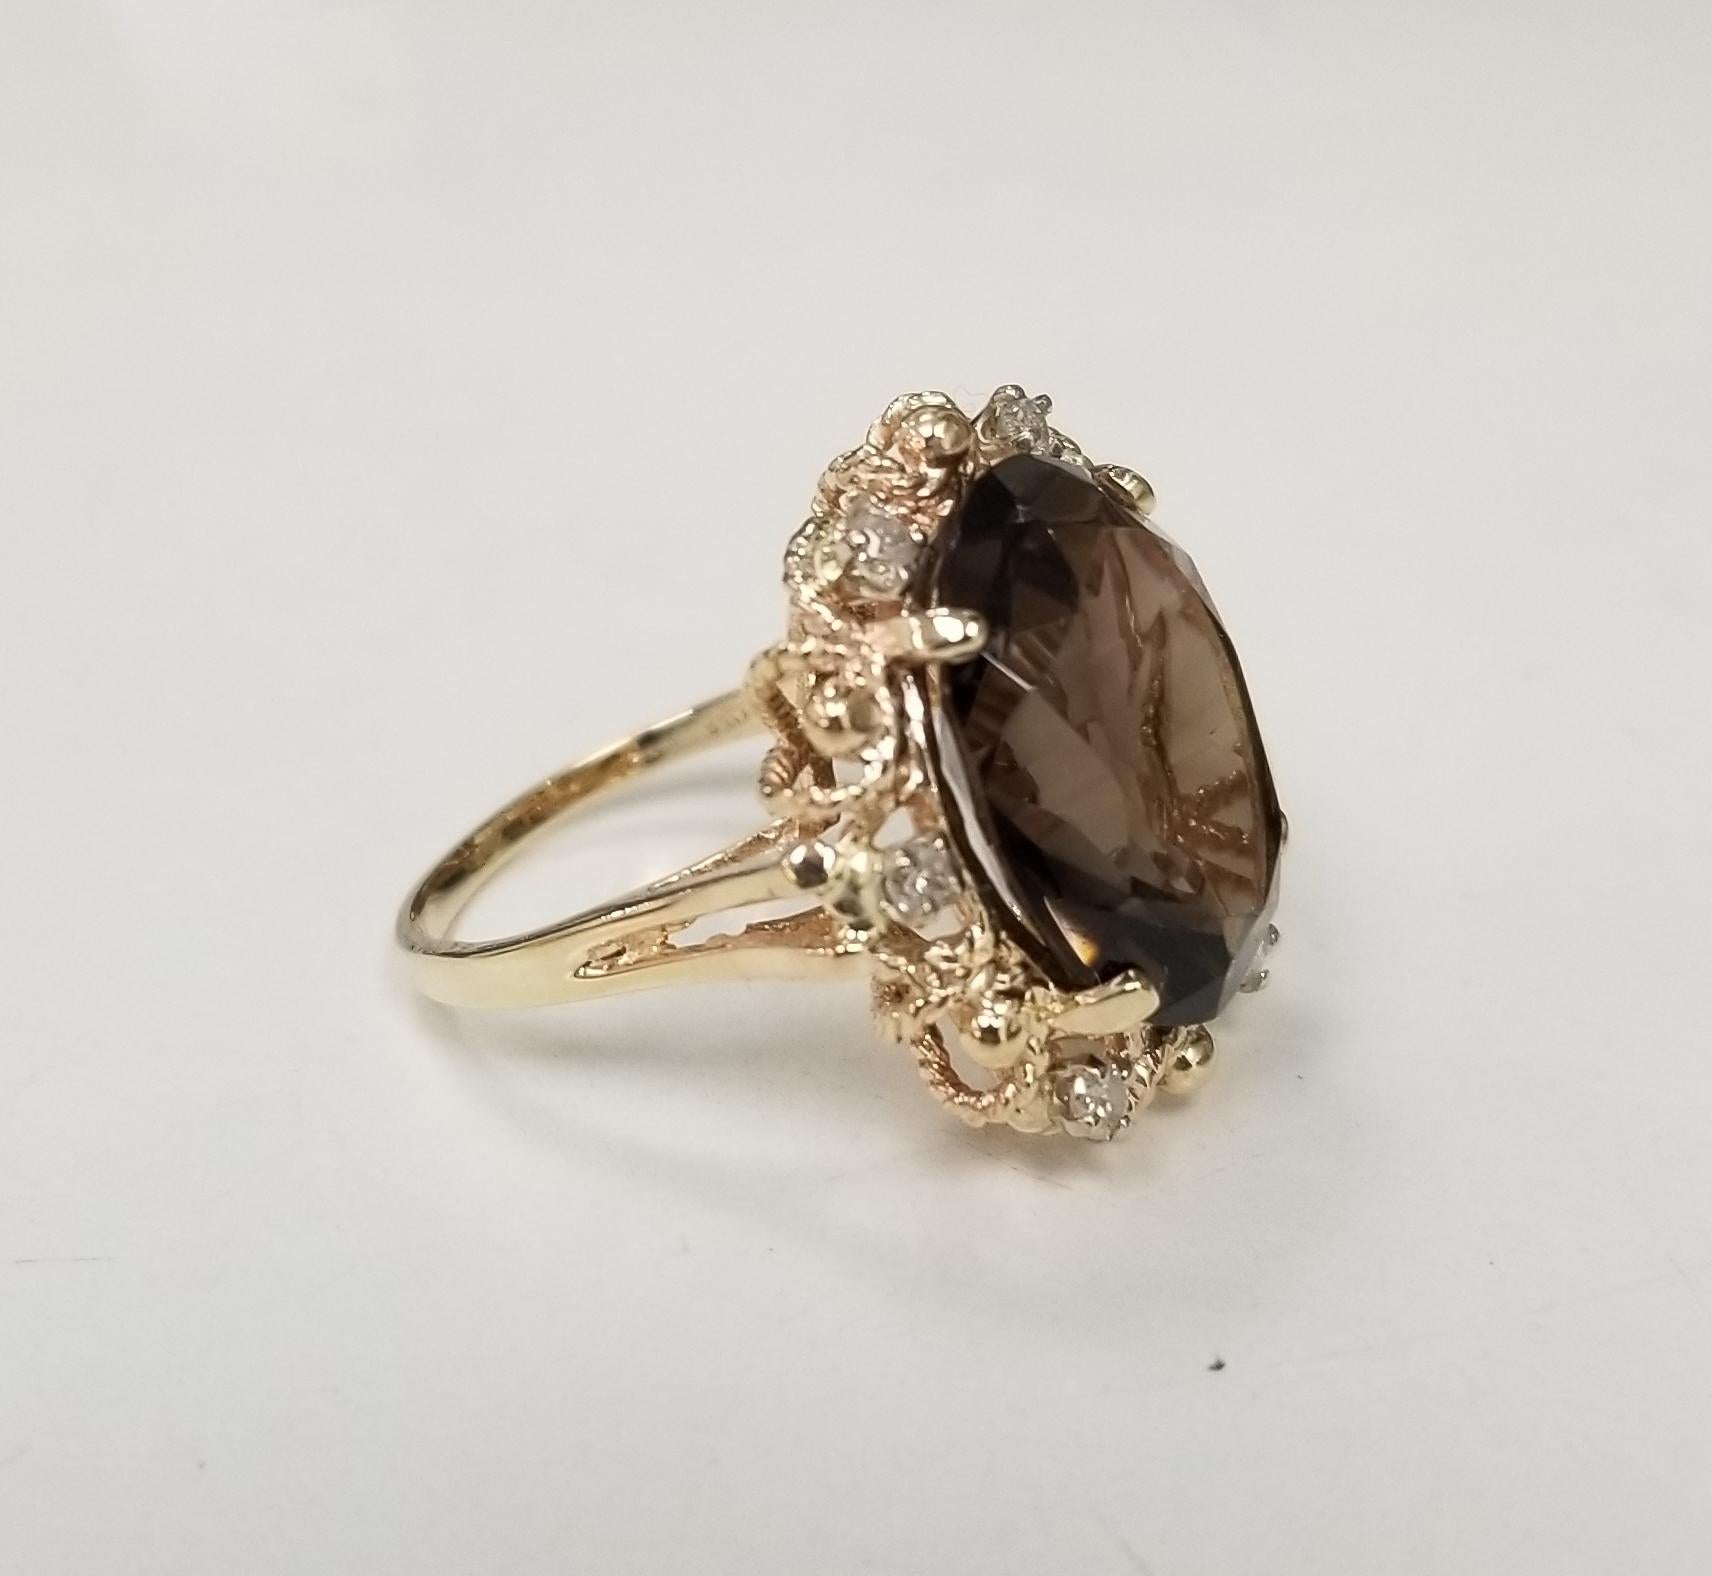 This beautiful Vintage 14k yellow gold topaz and diamond ring, containing 
Specifications:
    main stone: OVAL CUT TOPAZ STONE 16mm x 12mm  
    addition; 6 round diamons .25pts.
    brand: CUSTOM 
    metal: YELLOW GOLD
    type: ring
    weight: